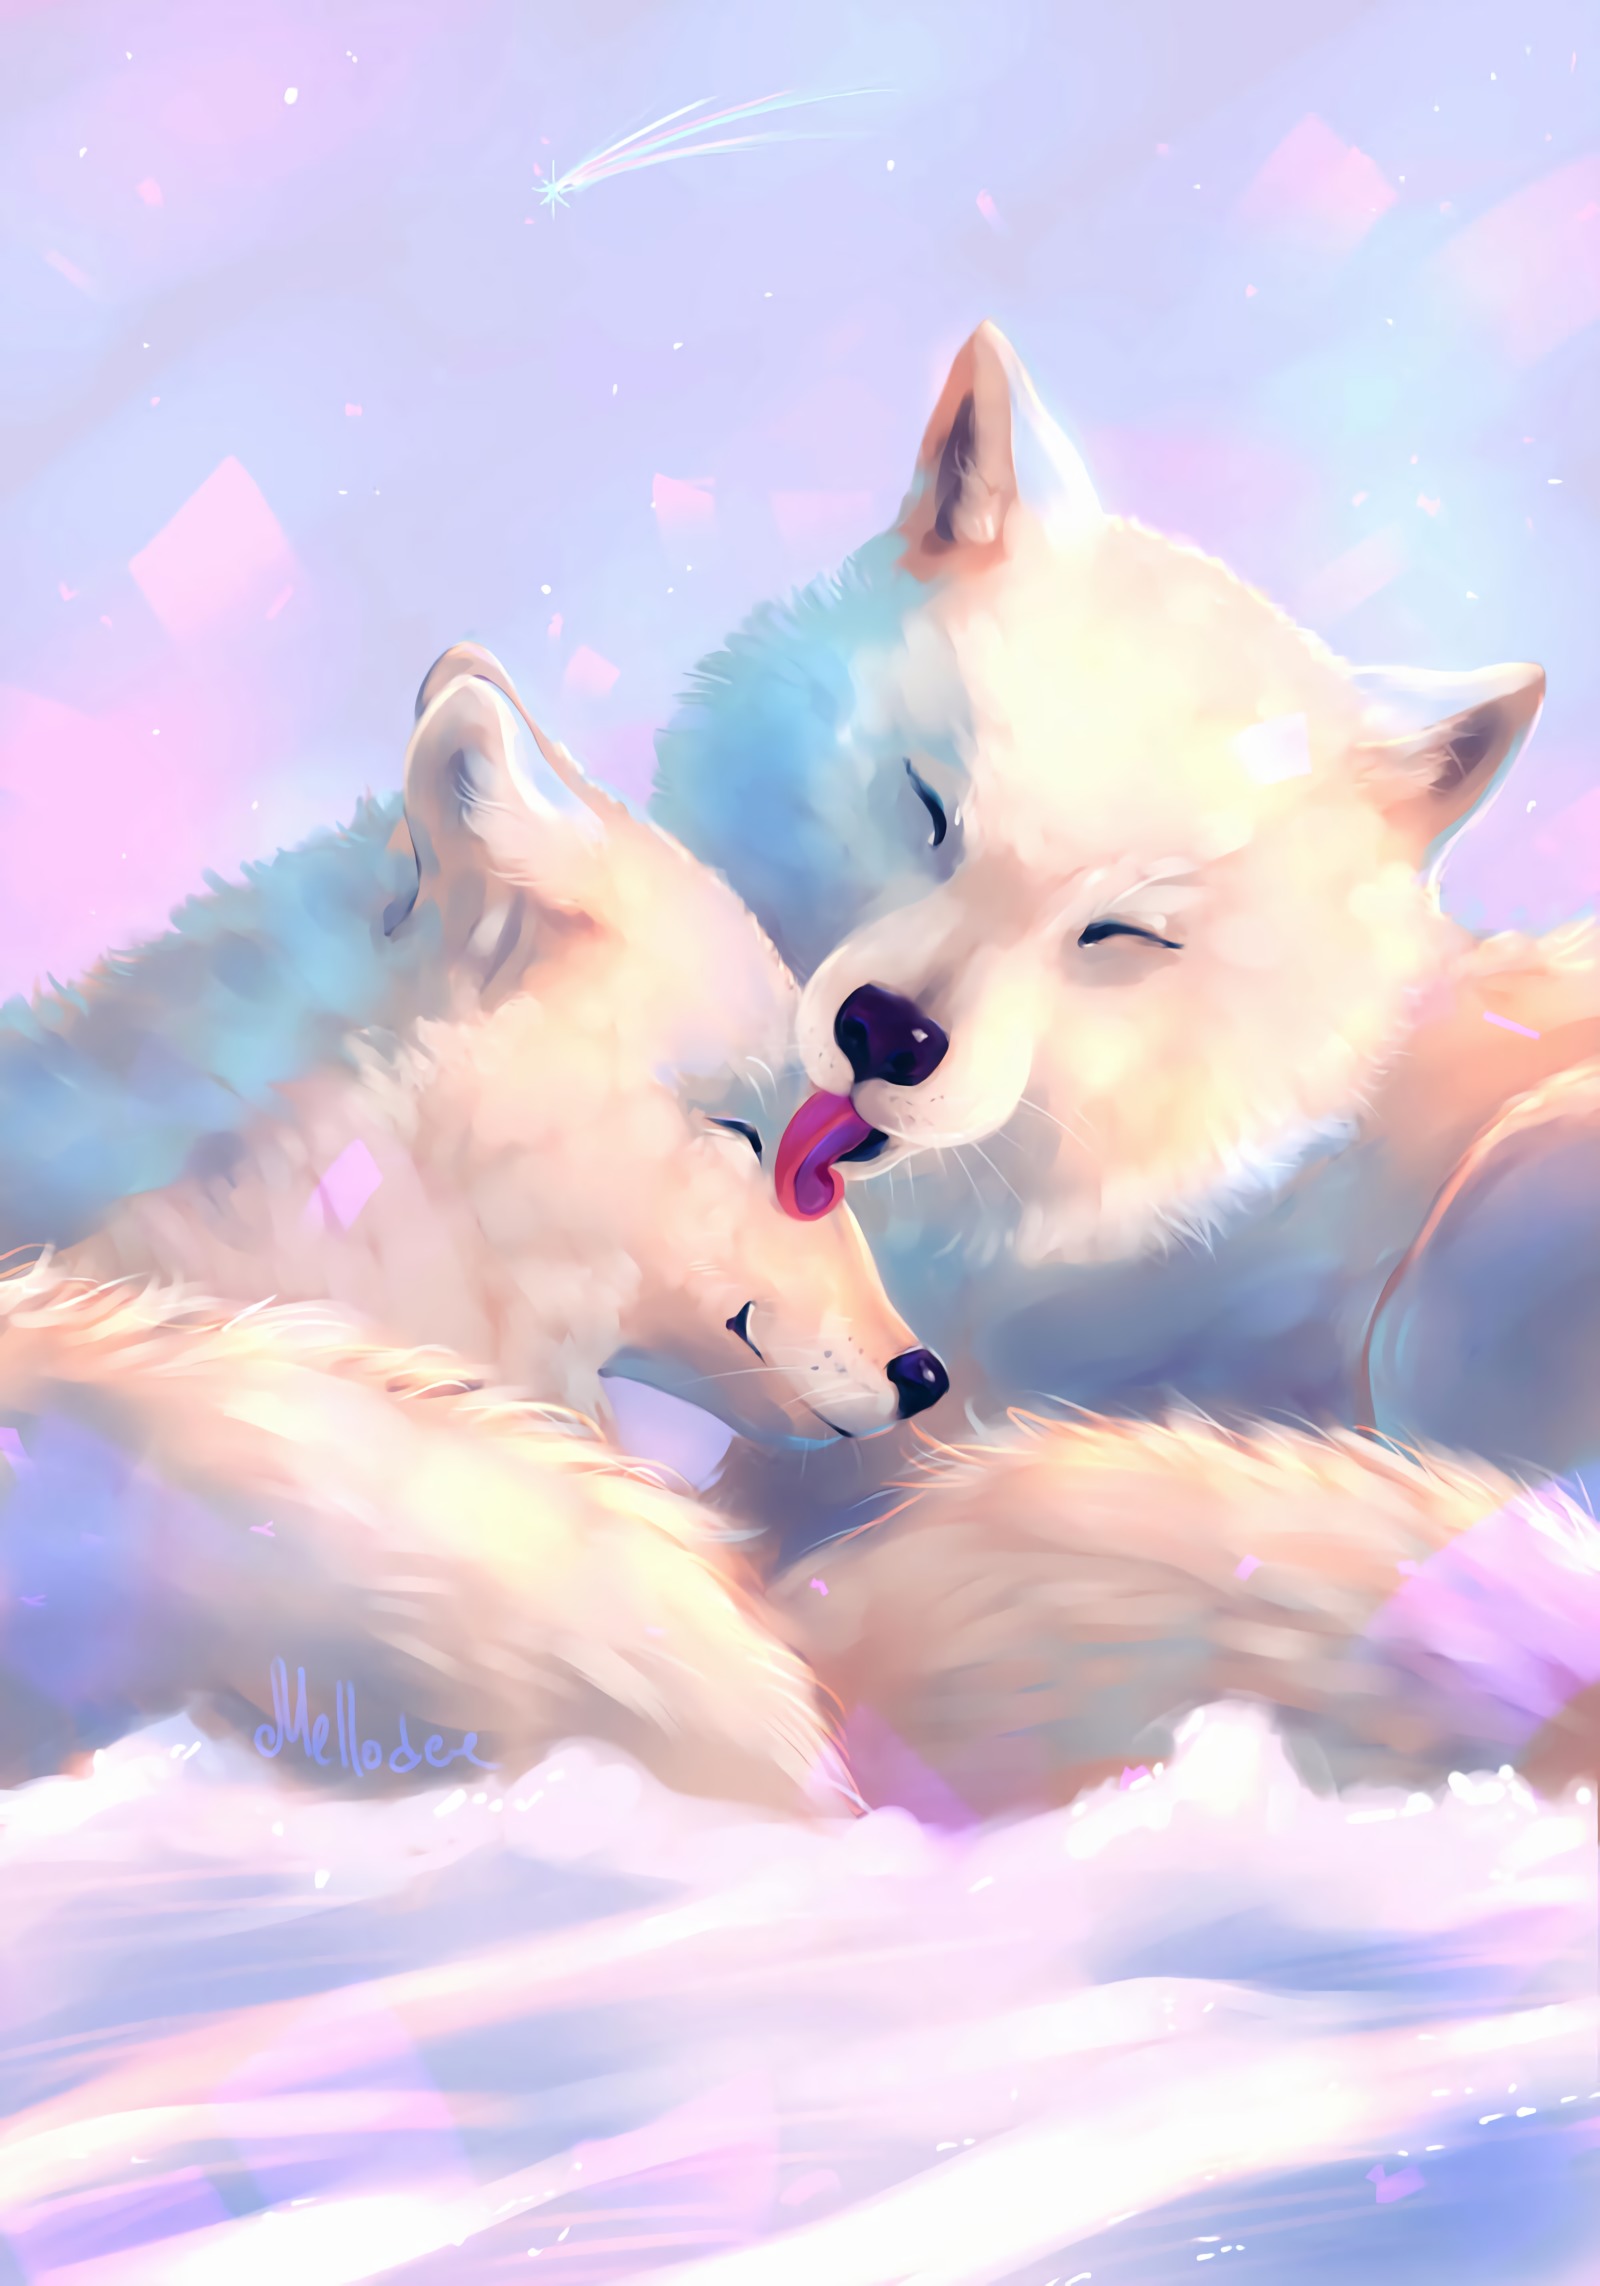 care, white, art, wolfs, tenderness, language, tongue cell phone wallpapers